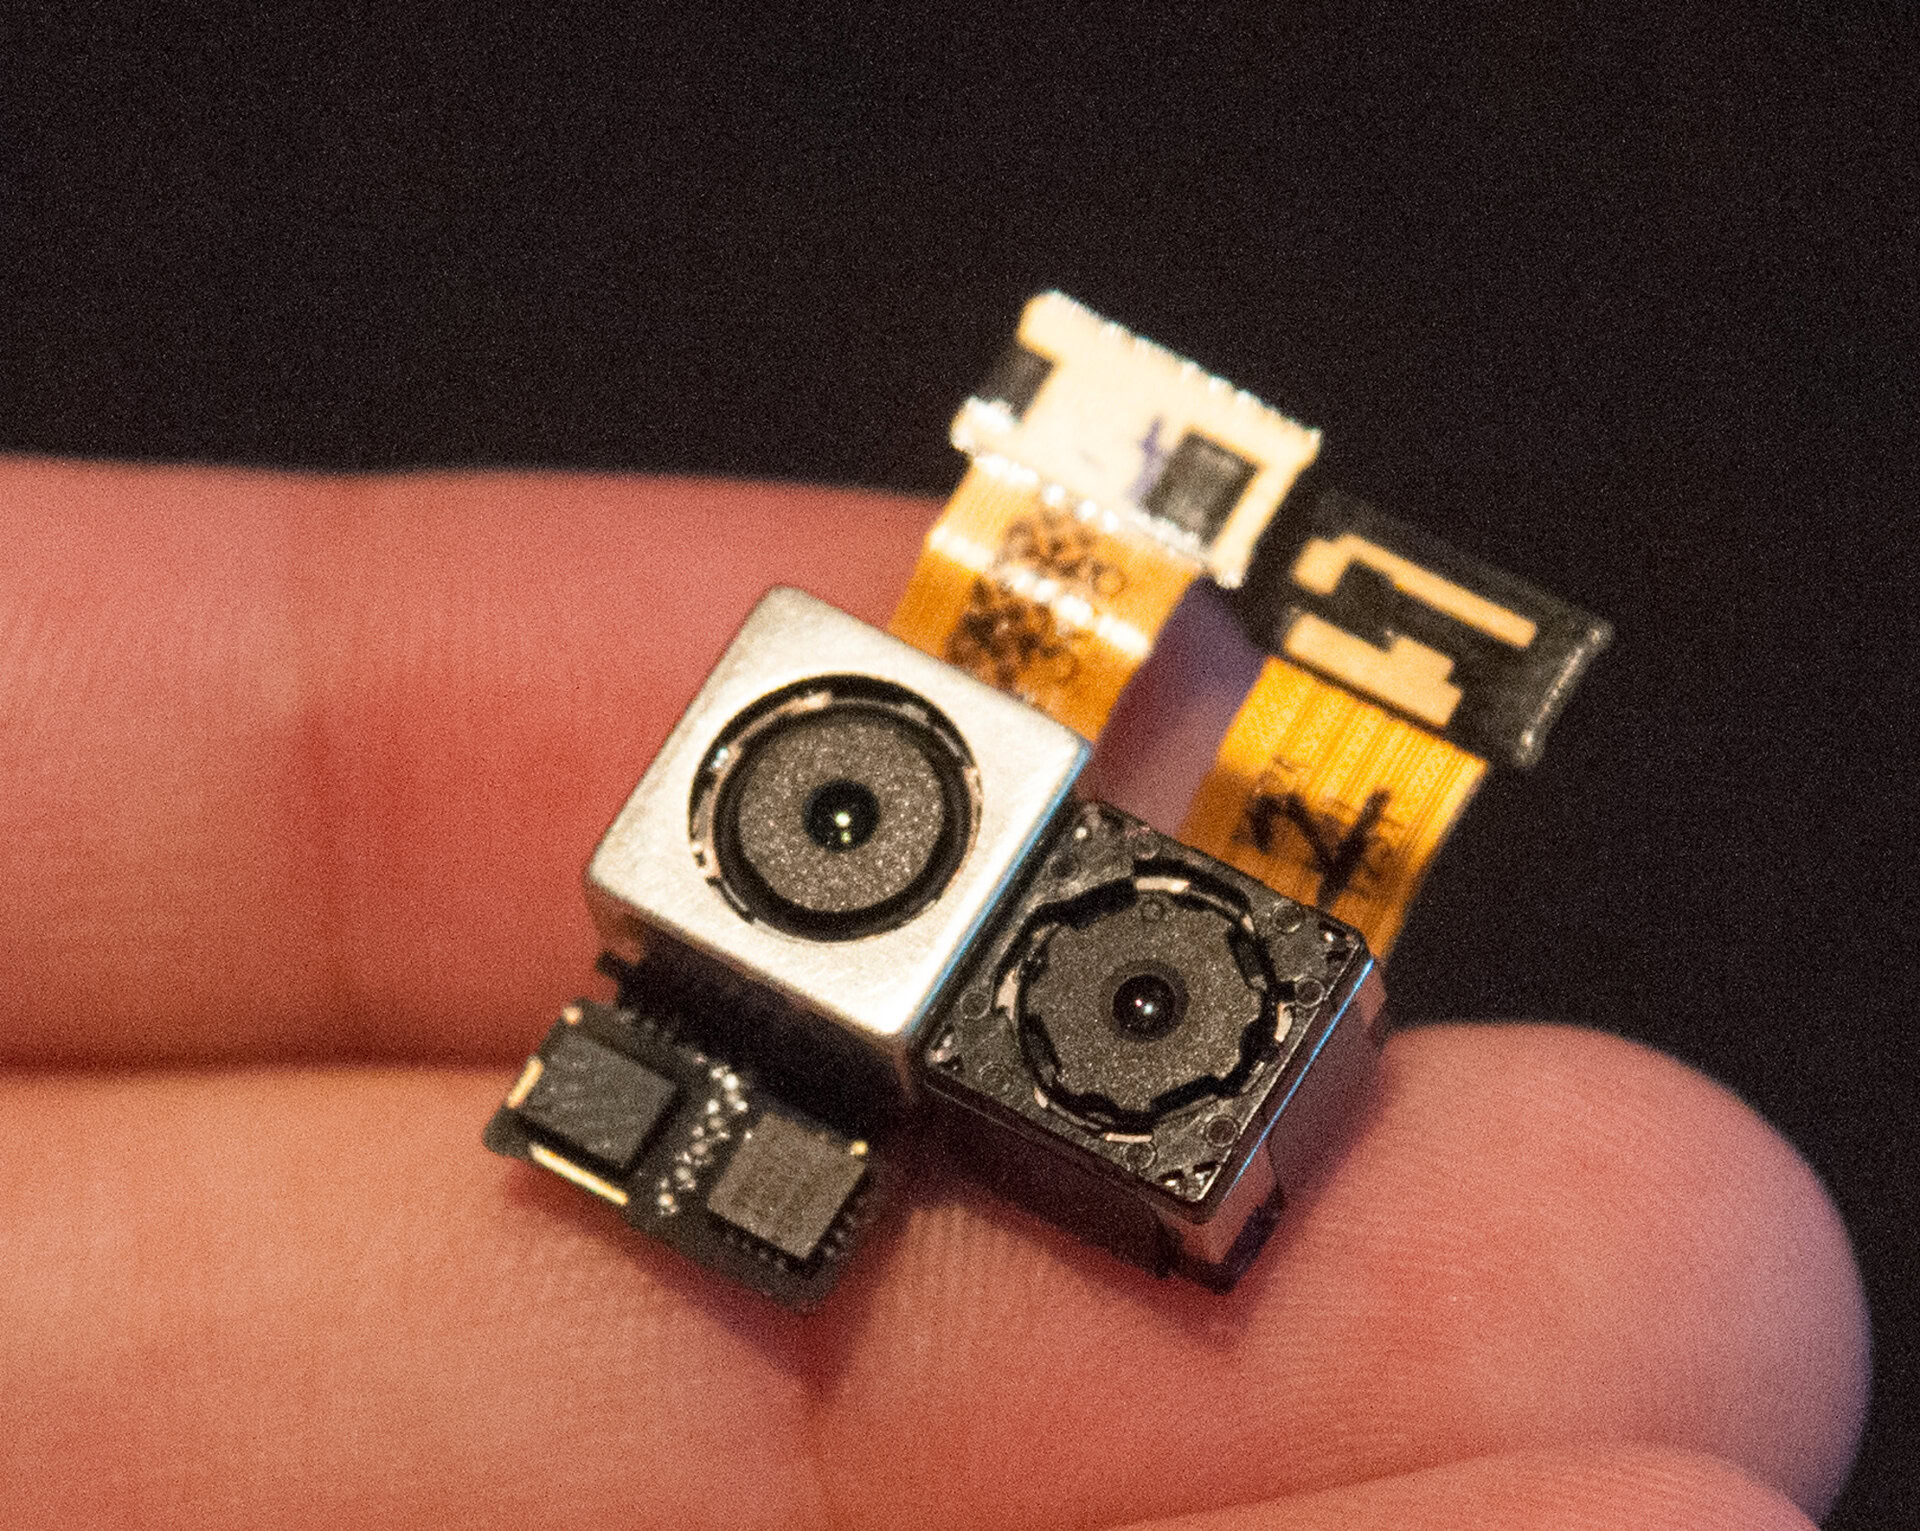 Camera module of LG G2, courtesy of AnandTech